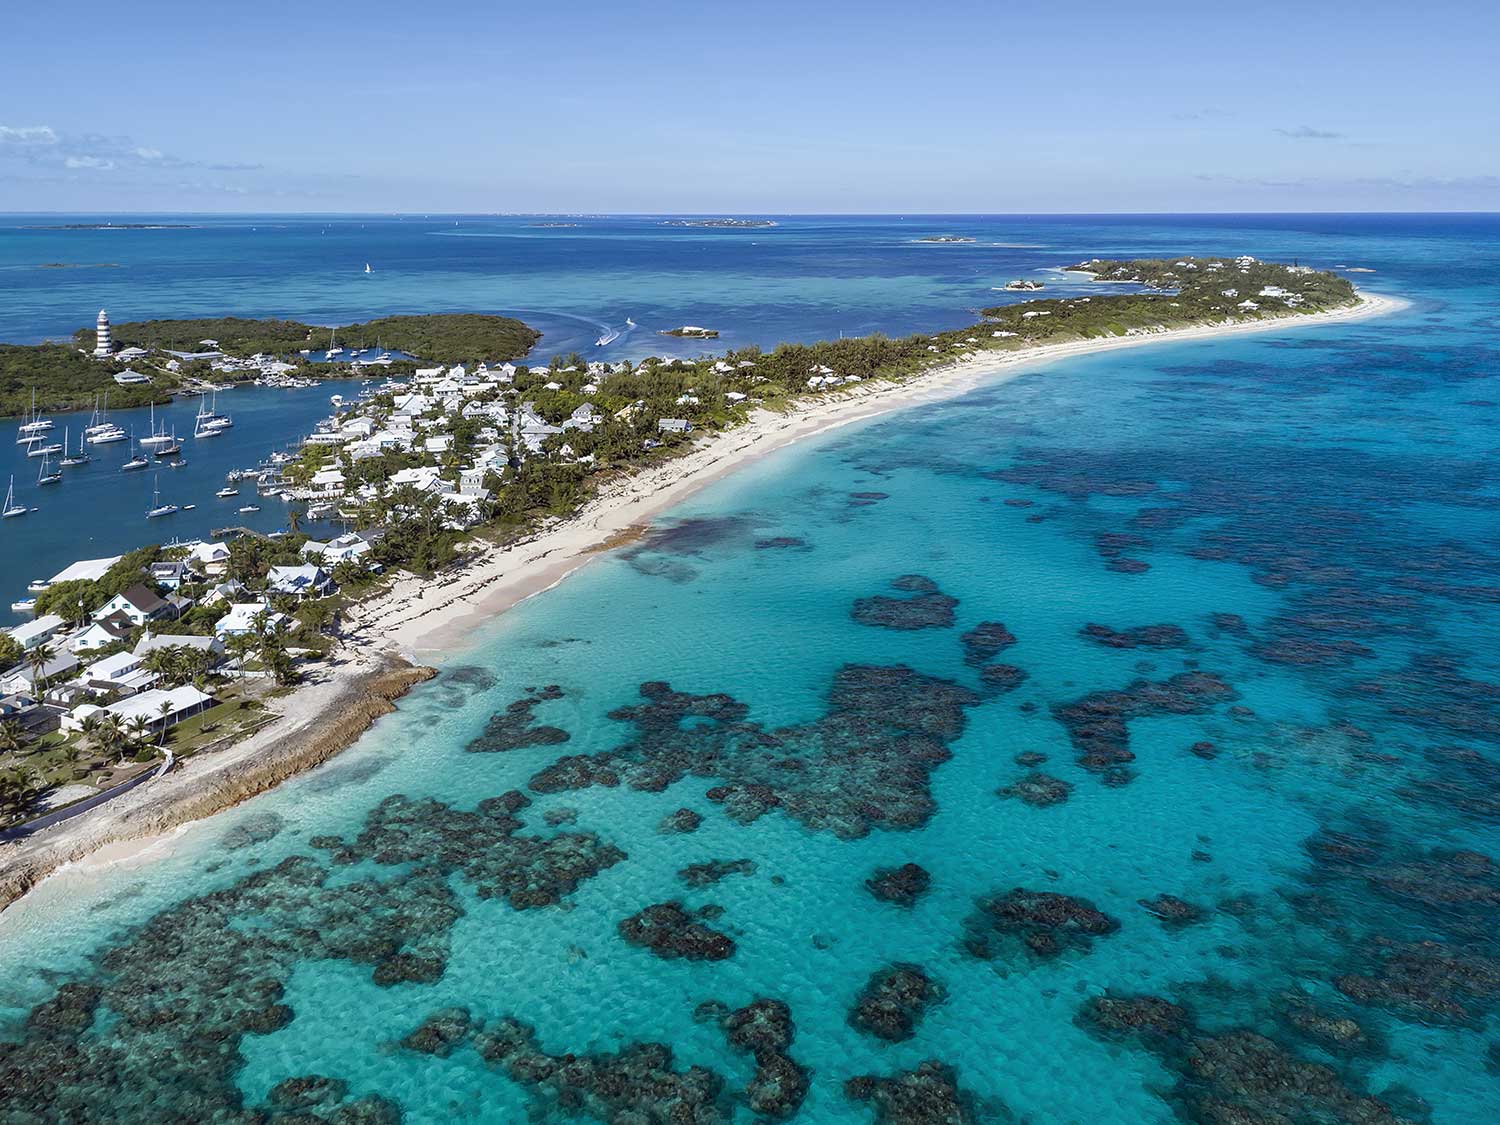 Abacos